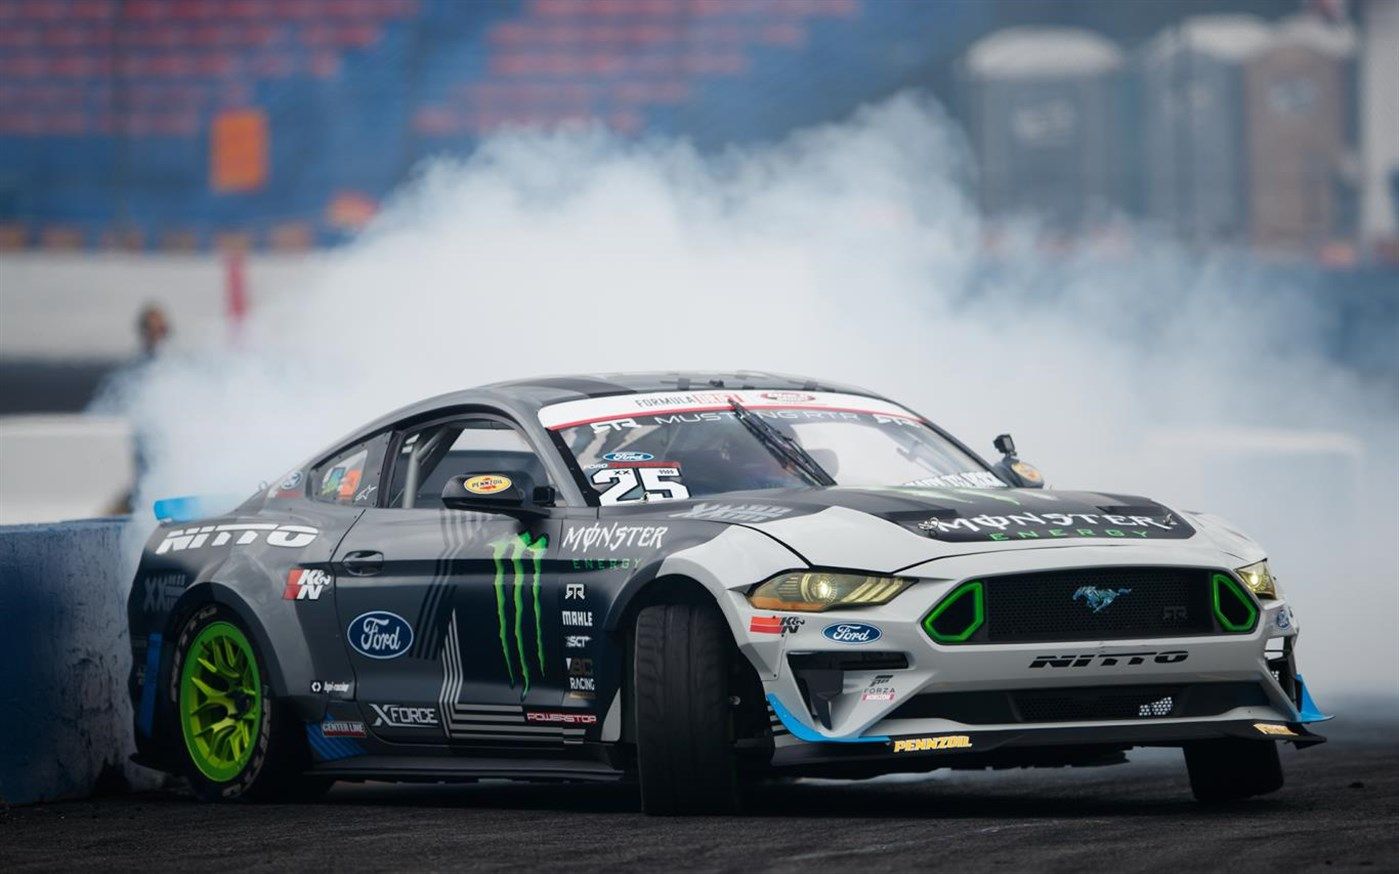 Windows 10 Users: Microsoft releases Ford Mustang RTR Formula